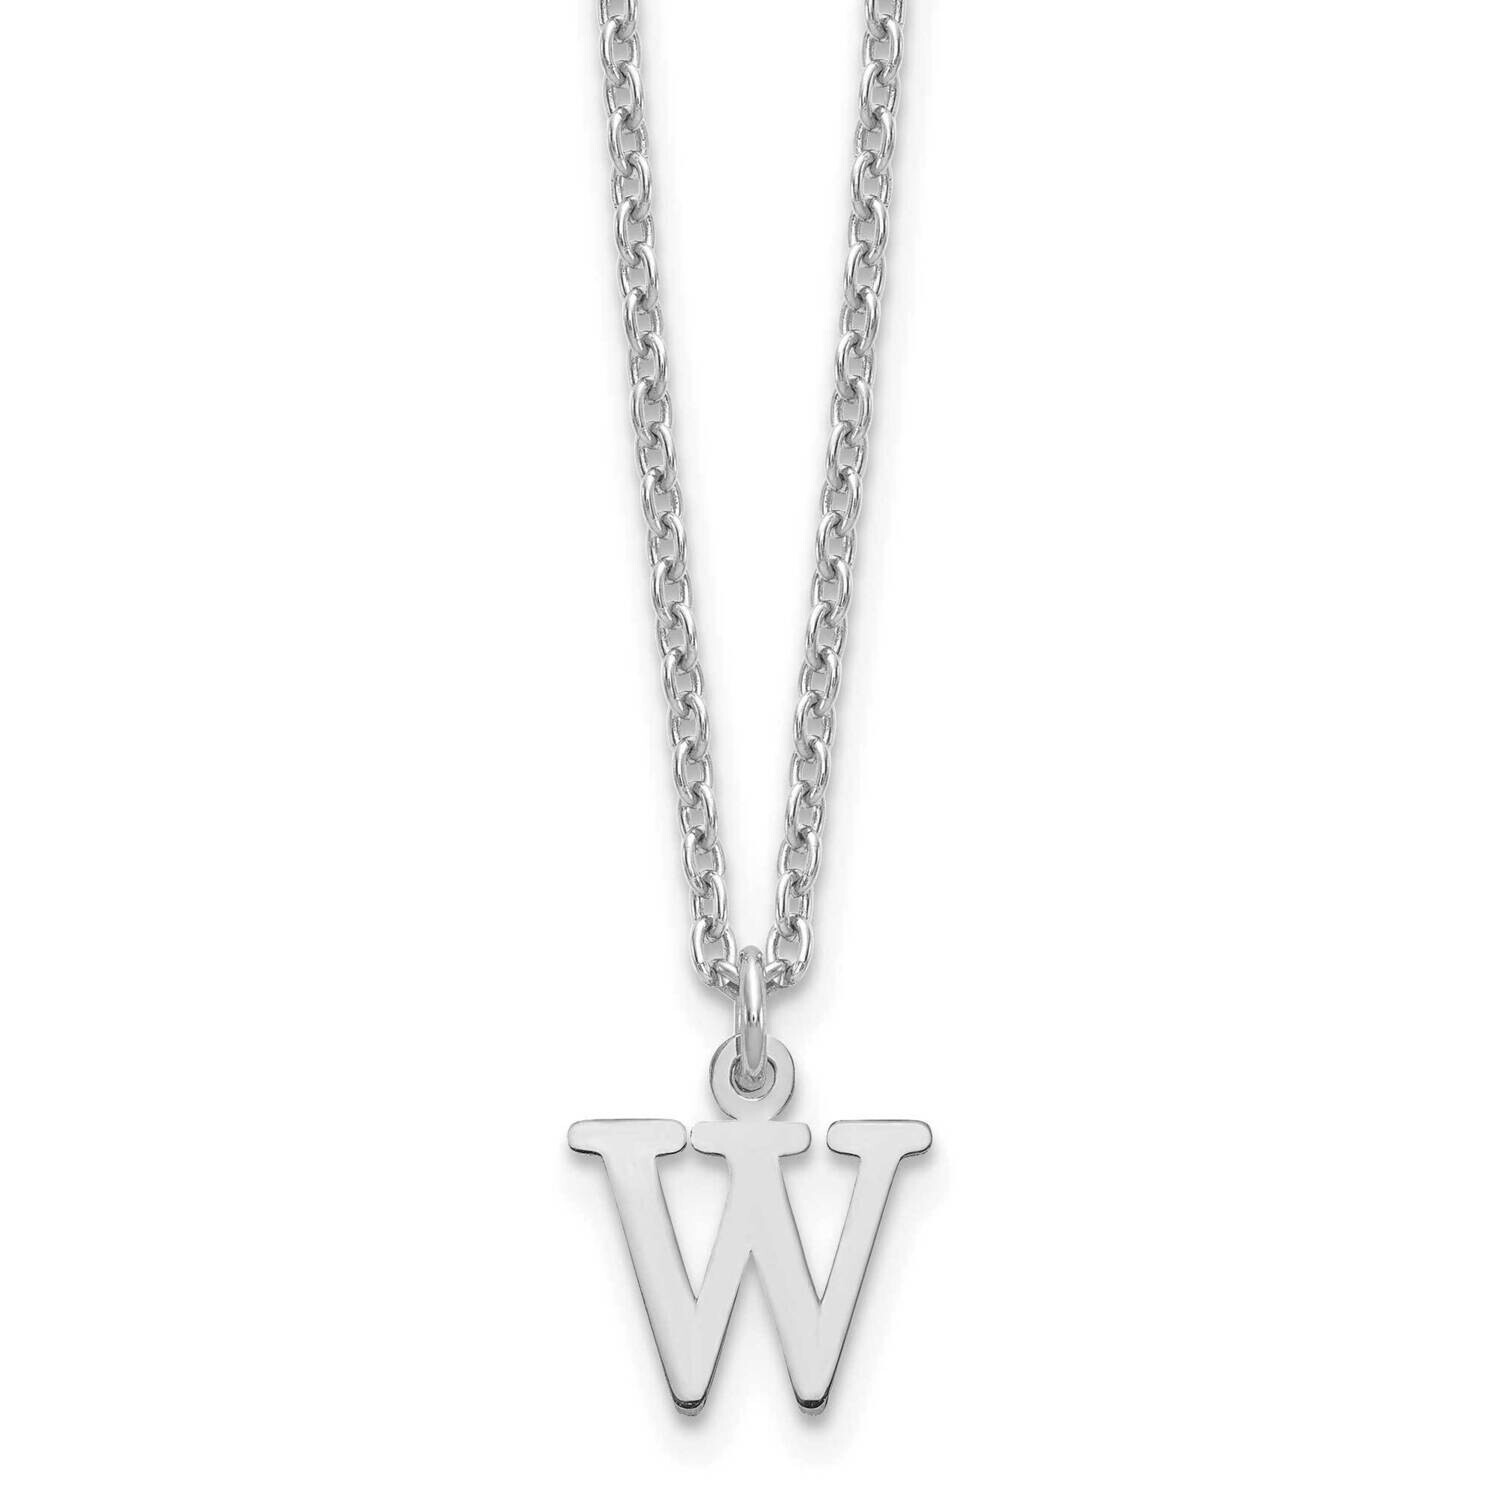 Cutout Letter W Initial Necklace Sterling Silver Rhodium-Plated XNA727SS/W